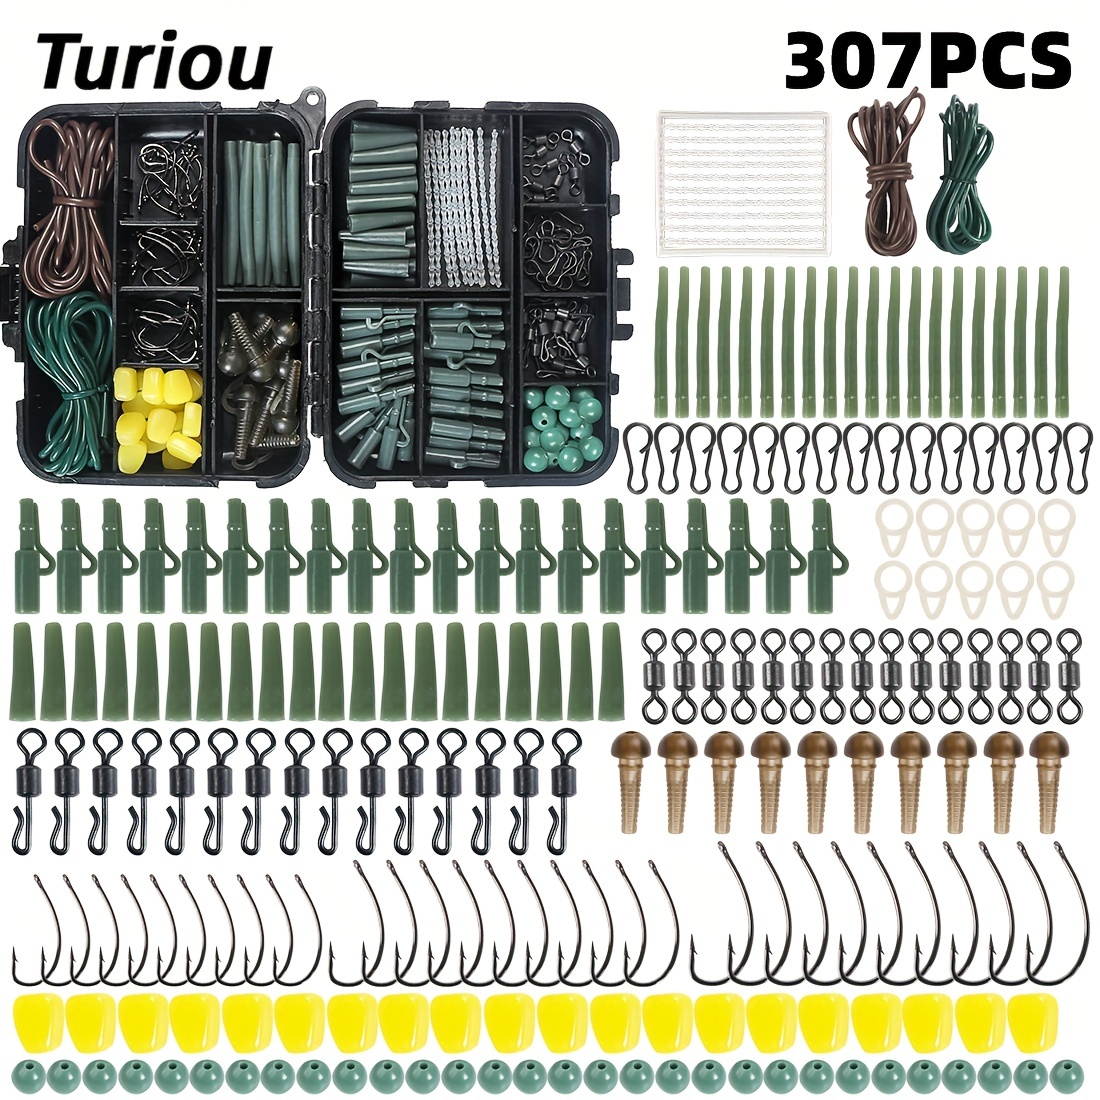 307pcs Complete Carp Fishing Tackle Set with Hooks, Bean Stoppers, Rolling  Swivels, Connectors, and Pins - Essential Gear for Successful Fishing